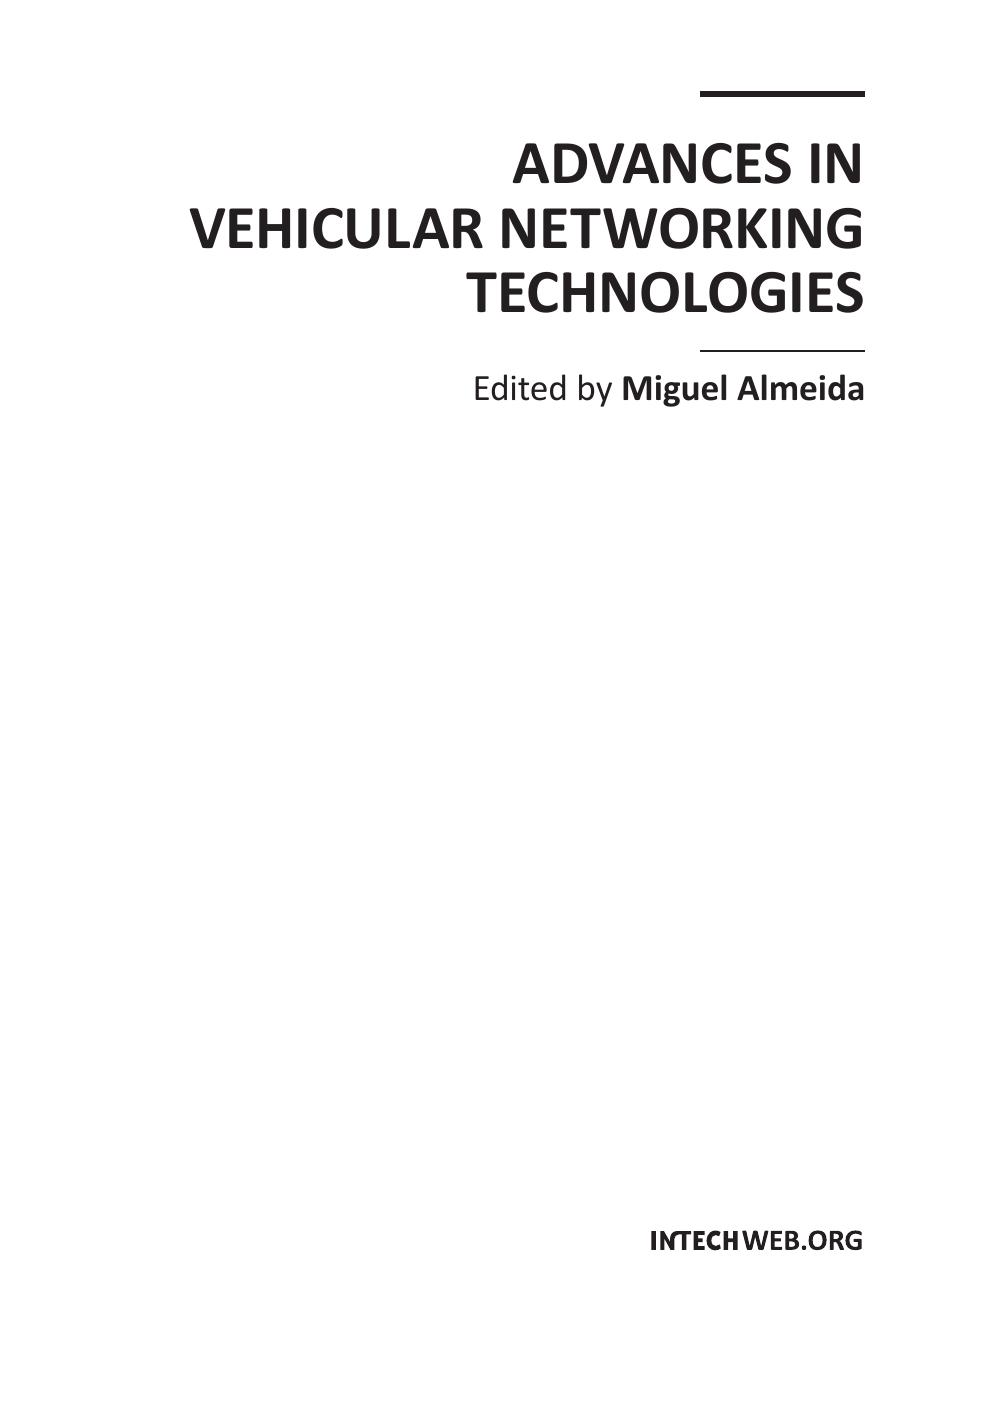 Advances in Vehicular Networking Technologies.indd